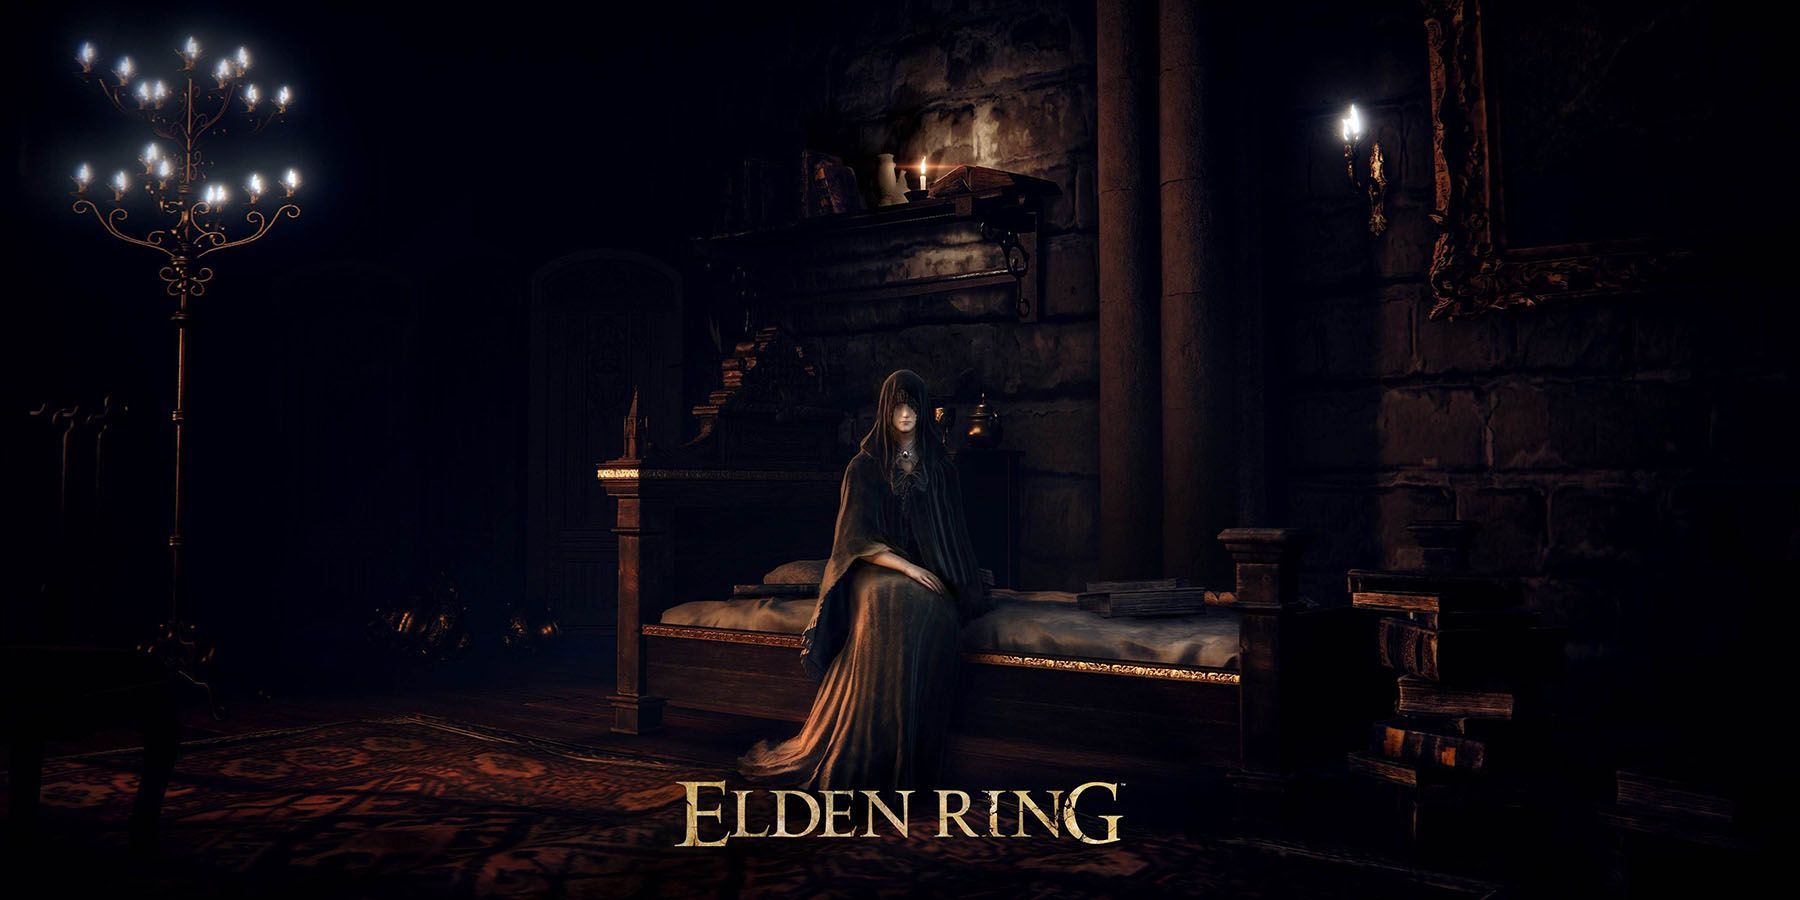 Elden Ring's Fia sitting on bed facing player